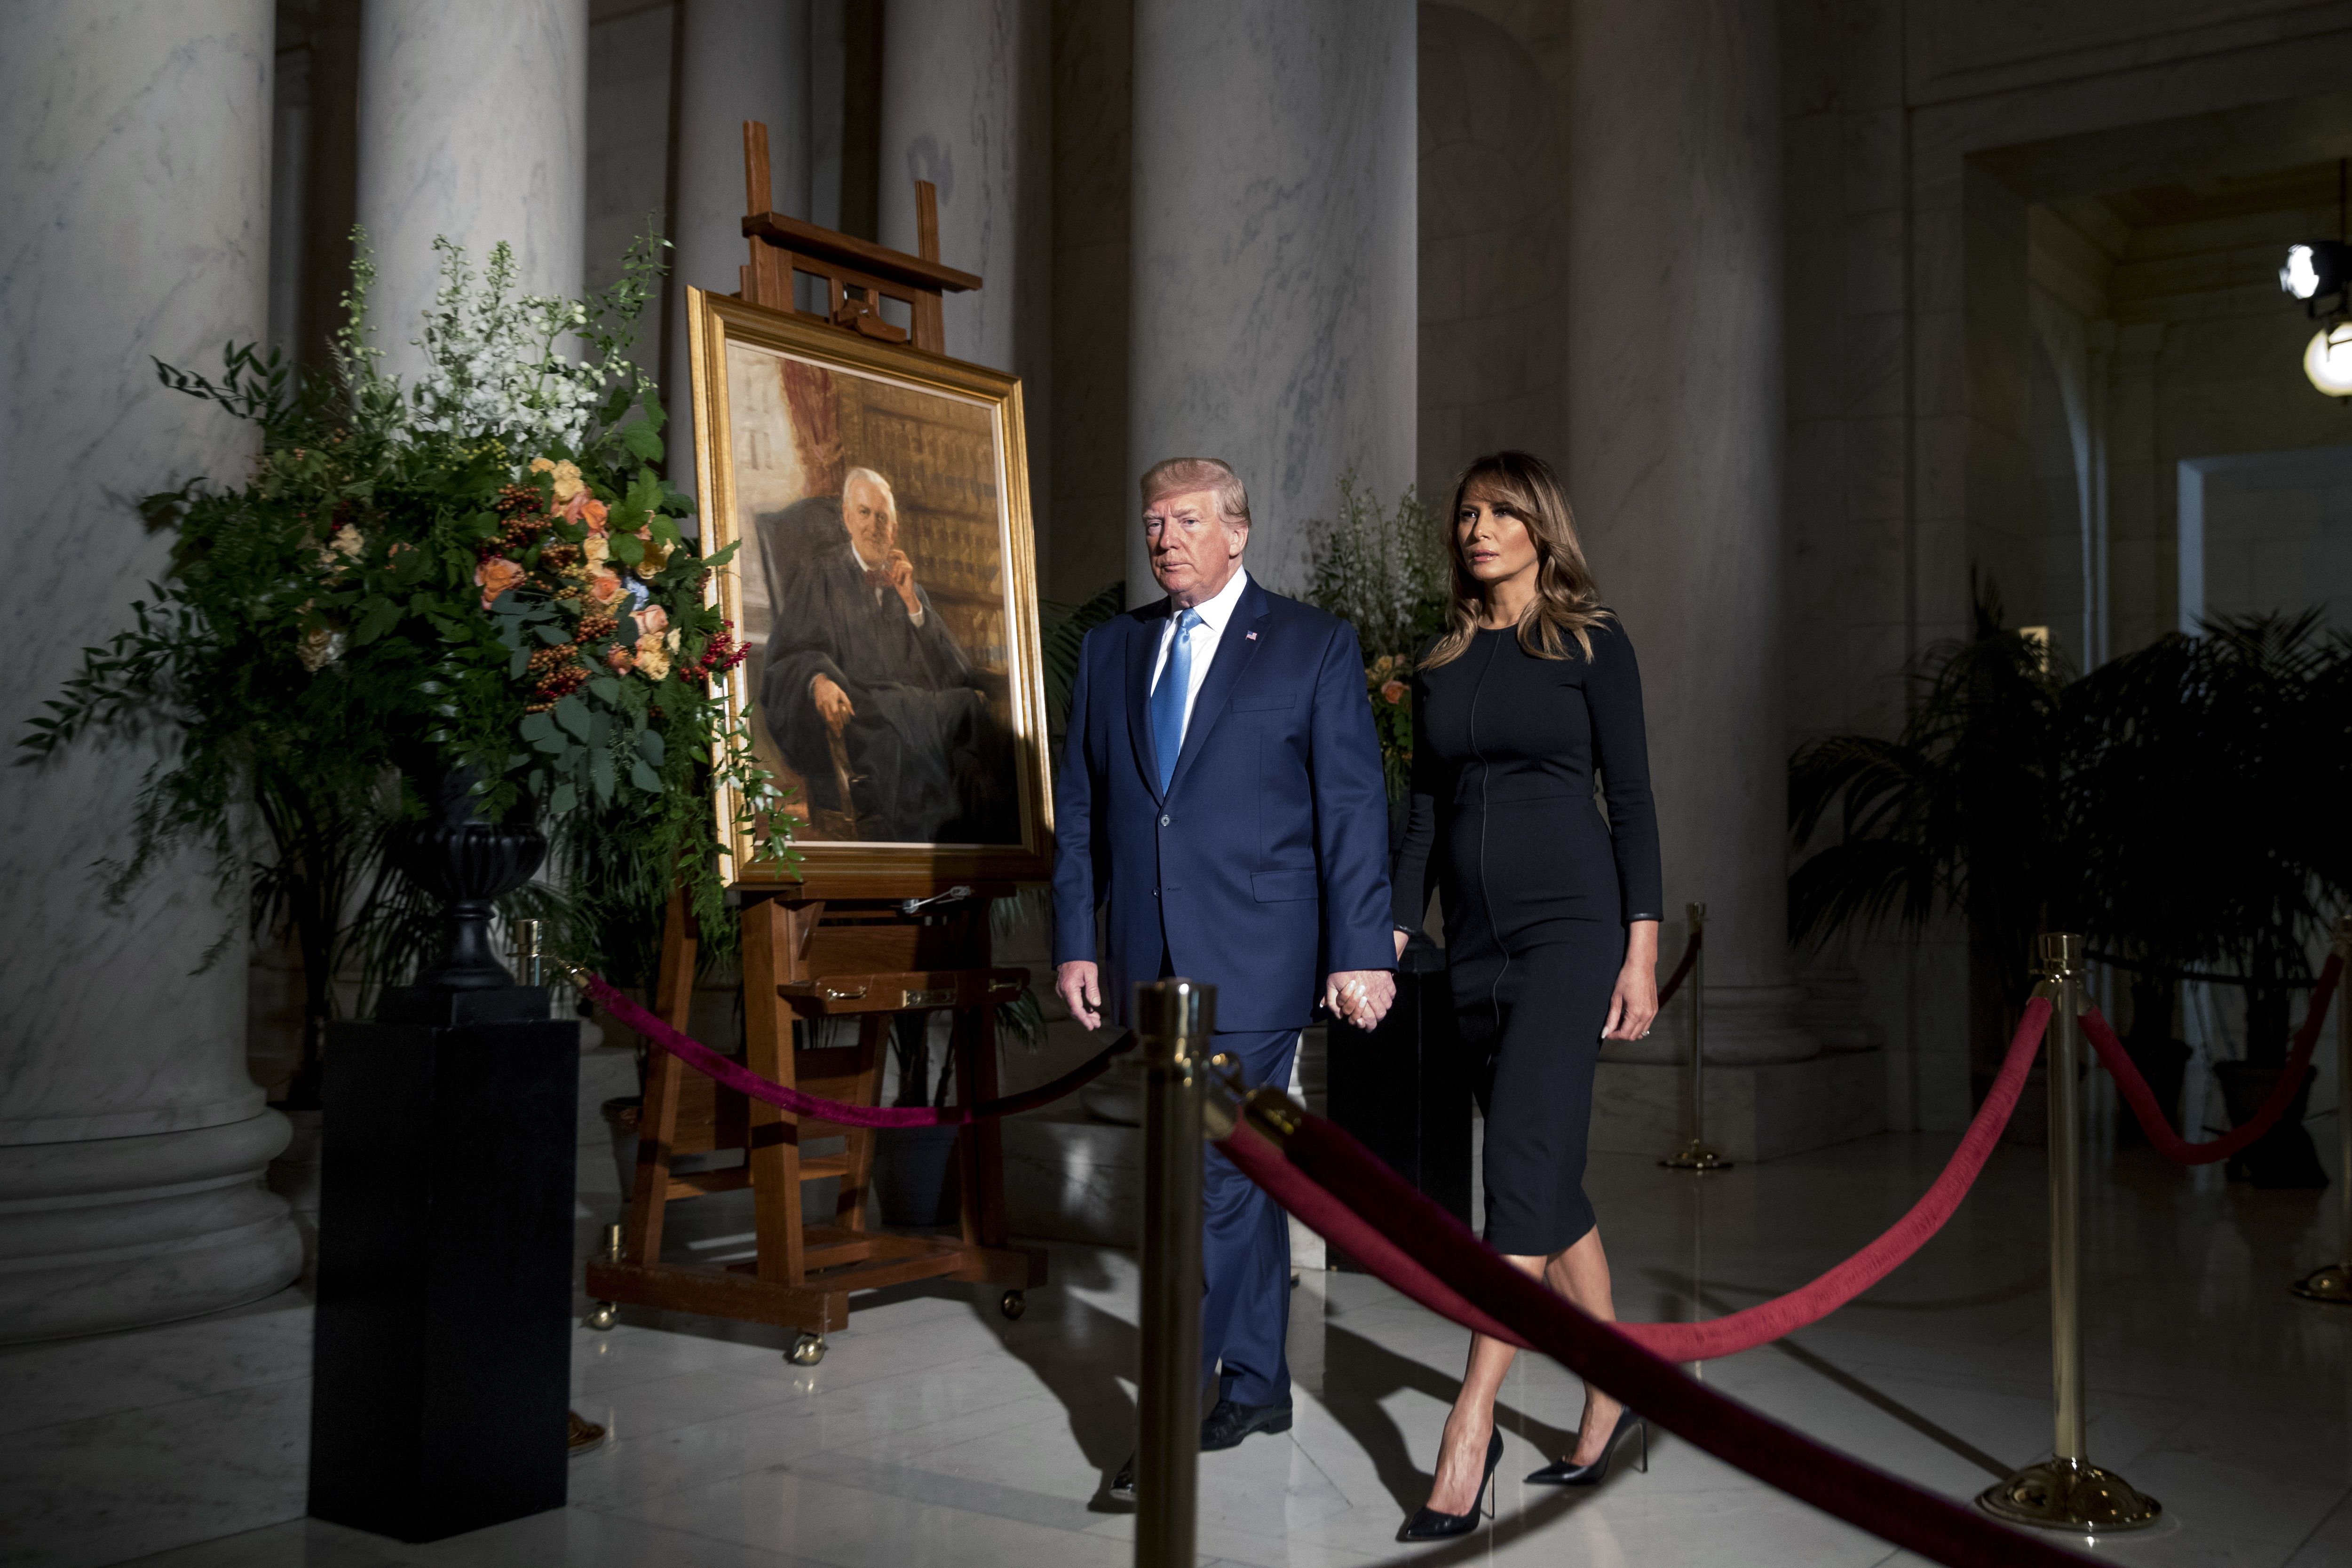 President Trump and First Lady Melania Trump. Photo: Andrew Harnik- Pool/Getty Images